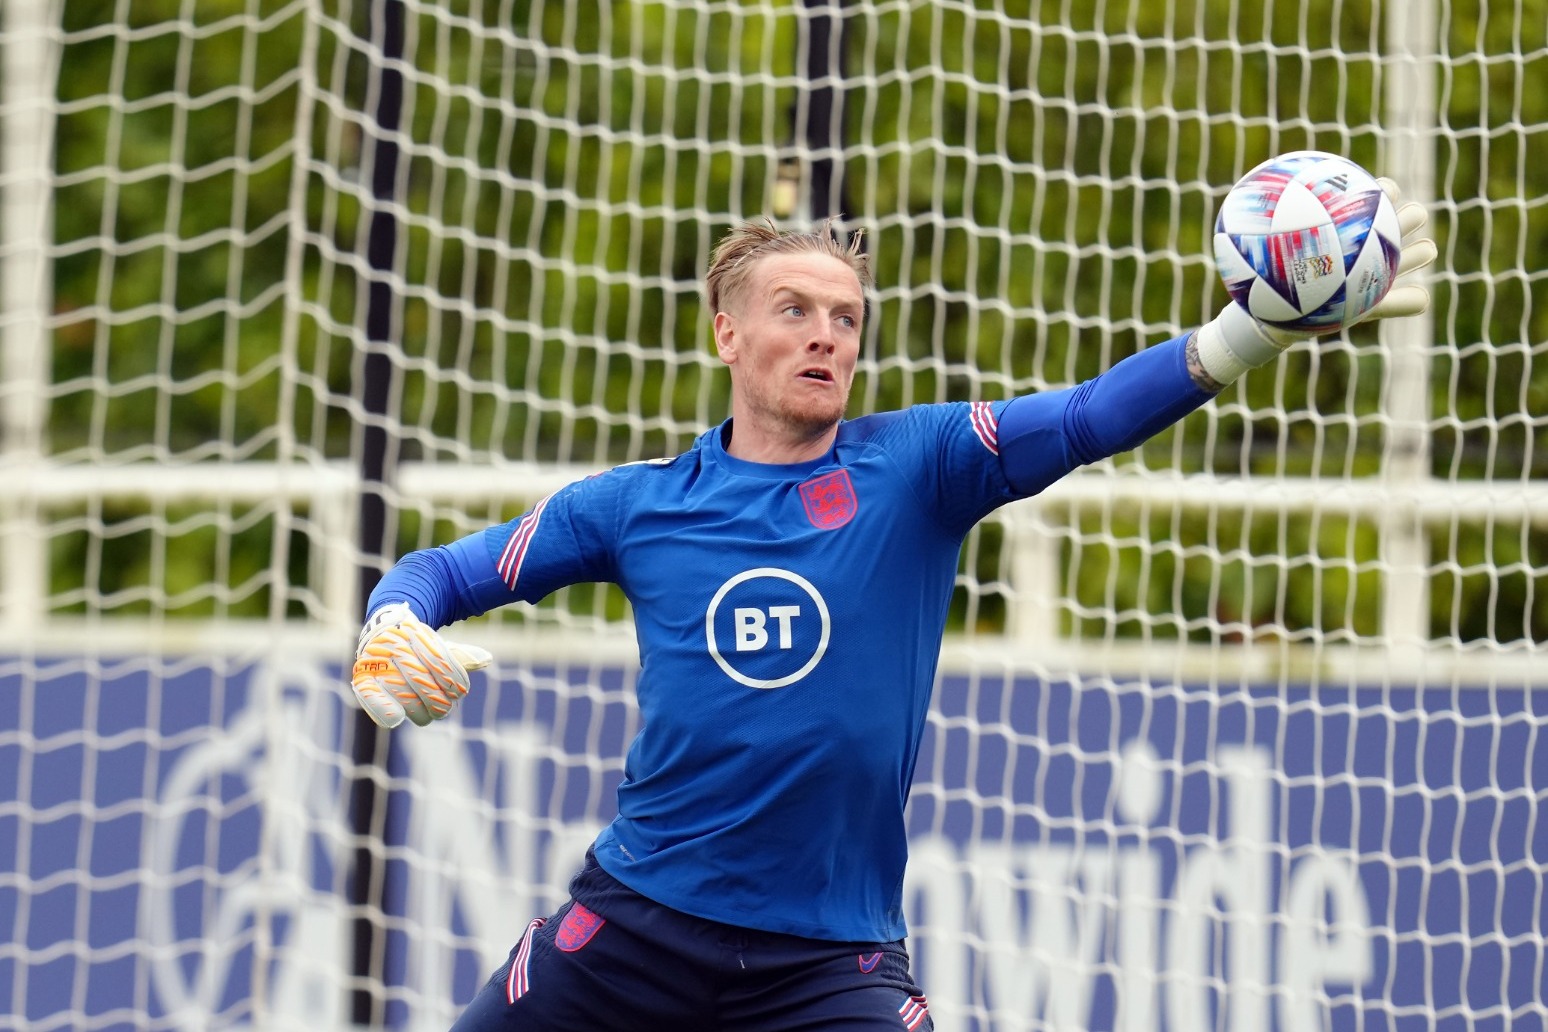 Jordan Pickford believes England can win the World Cup in Qatar 